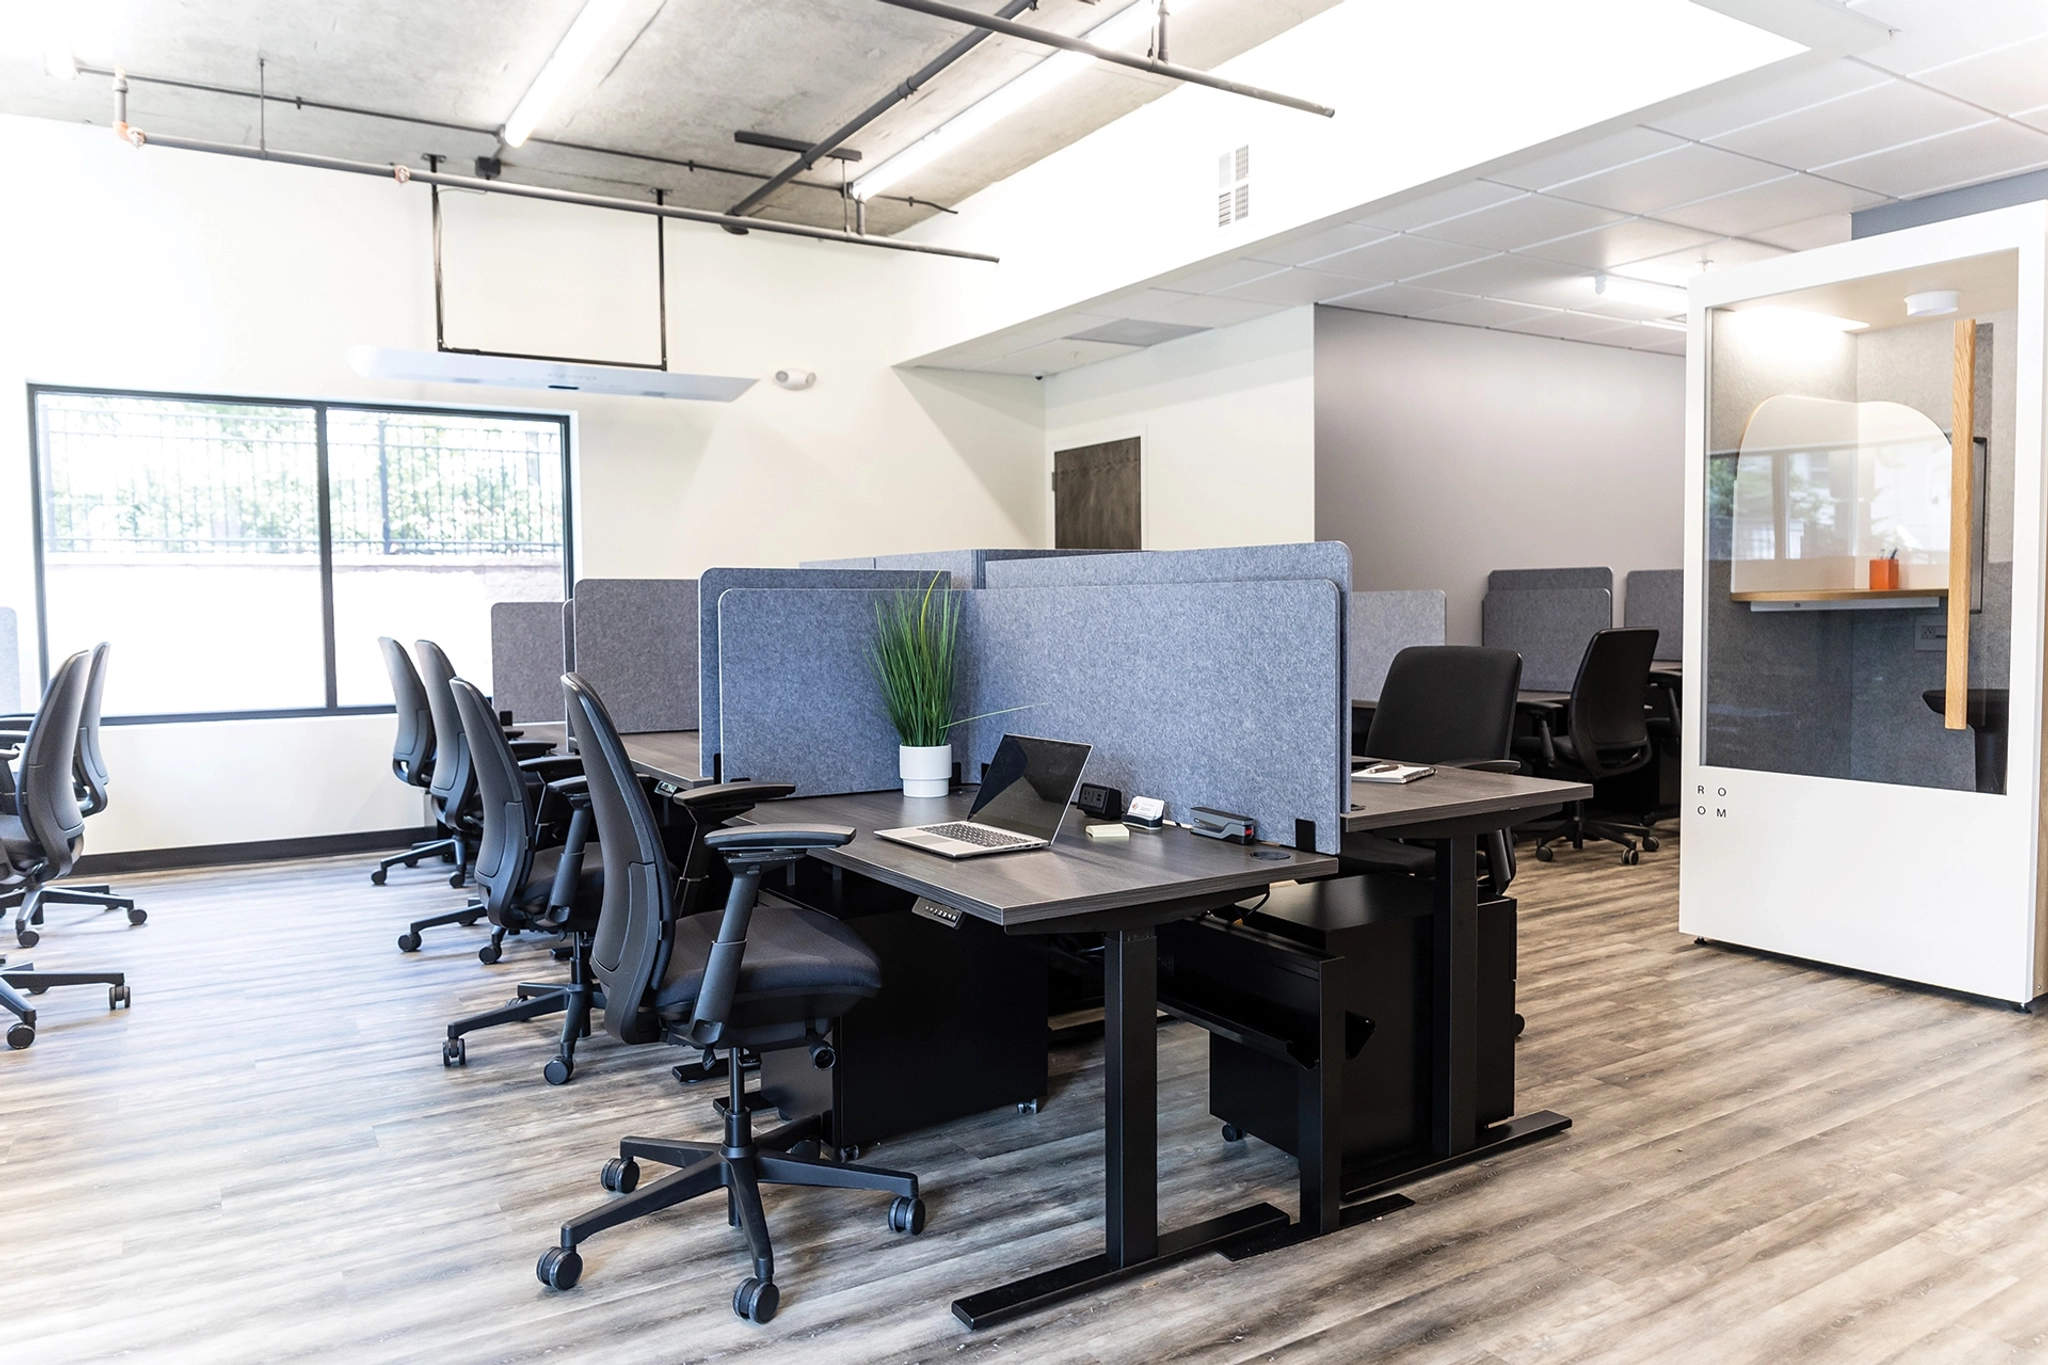 A Maplewood office with workspaces consisting of desks and chairs.